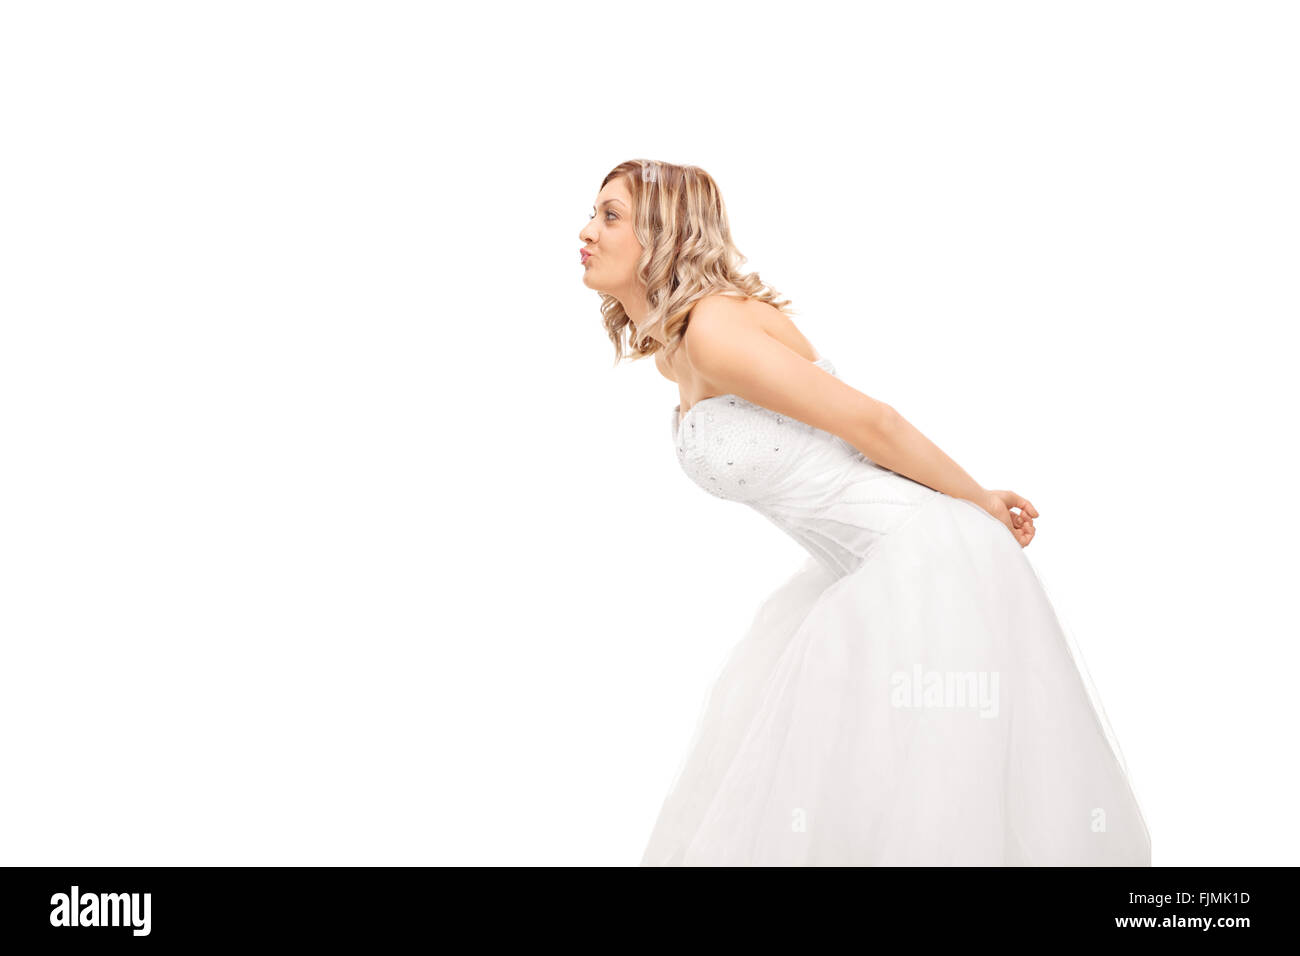 Profile shot of a young blond bride leaning to kiss someone isolated on white background Stock Photo